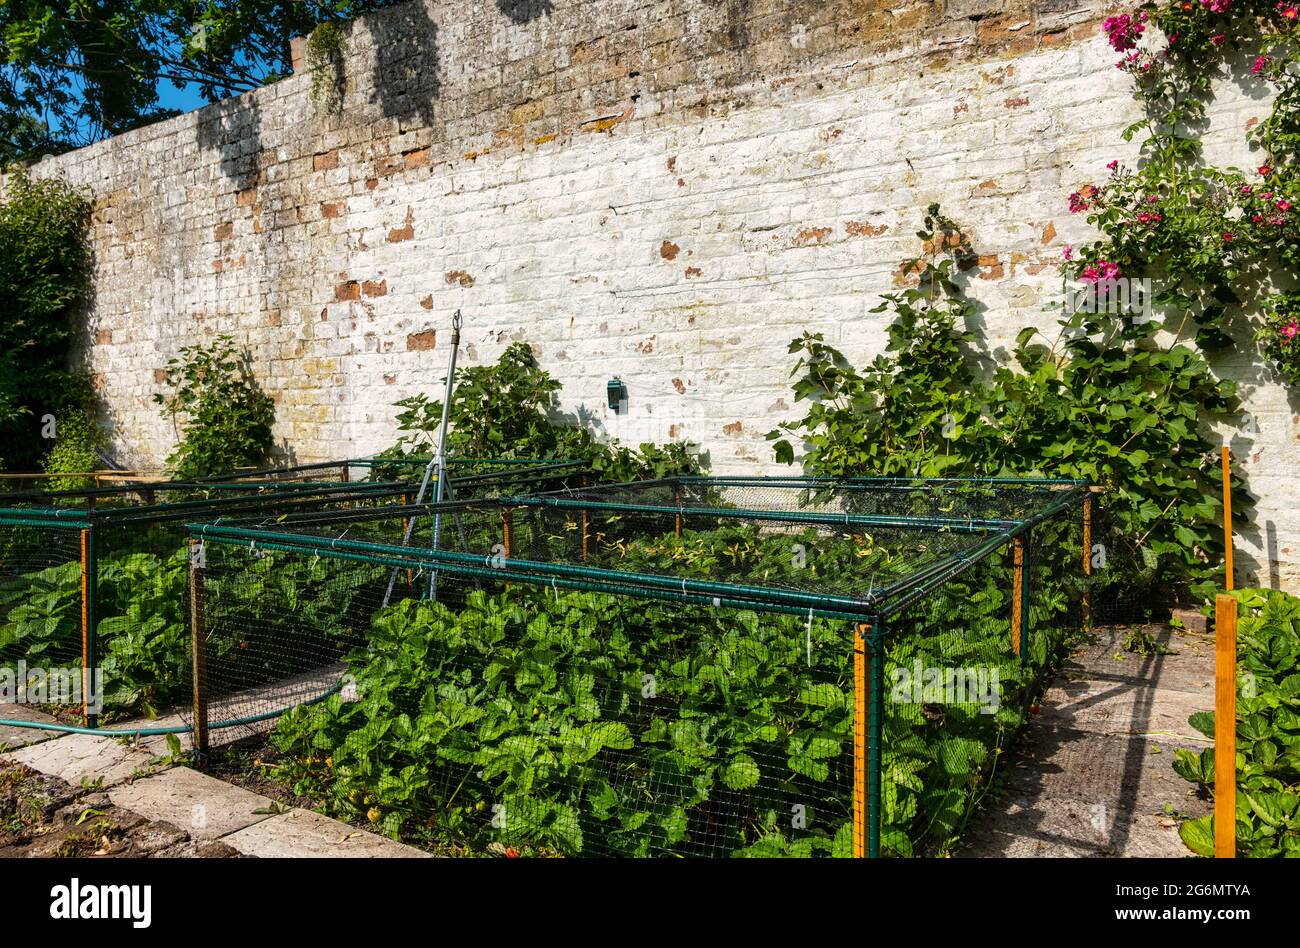 Strawberry plants growing in walled garden protected by netting in Summer sunshine with a watering system, Scotland, UK Stock Photo